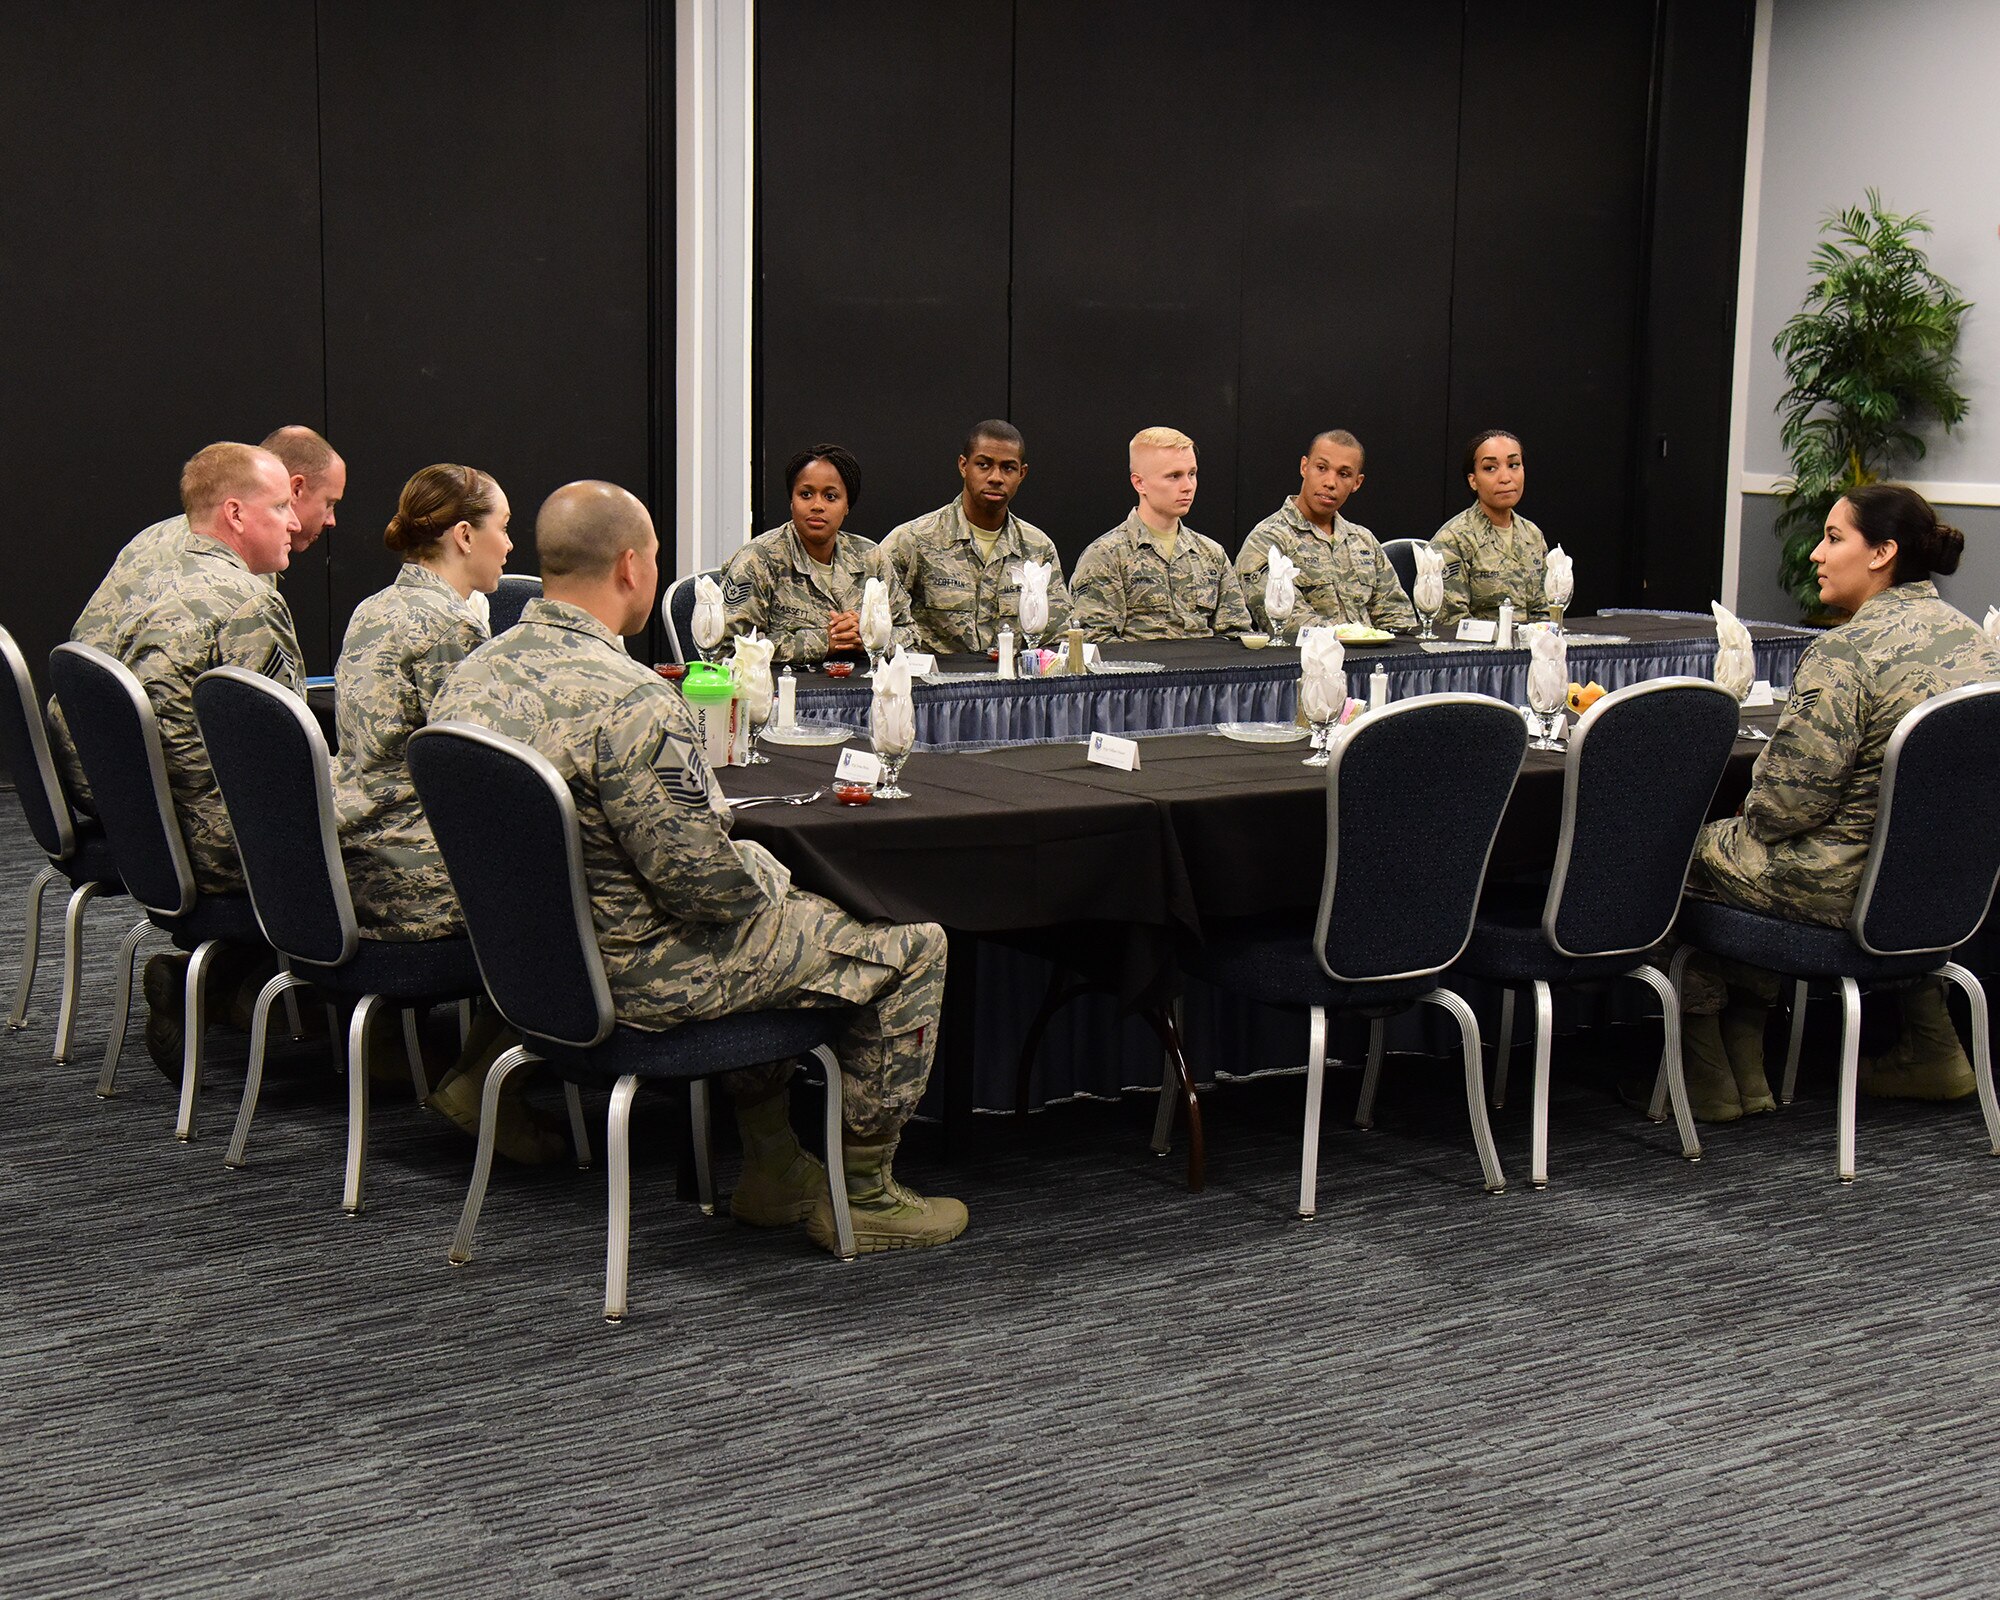 U.S. Air Force Chief Master Sgt. Juliet Gudgel, command chief of Air Education and Training Command, eats lunch with Team BLAZE’s top performing Airmen, at Columbus Air Force Base, Mississippi, June 21, 2018. Gudgel spoke to the Airmen about future plans for AETC and asked them for feedback on new projects. (U.S. Air Force photo by Elizabeth Owens)